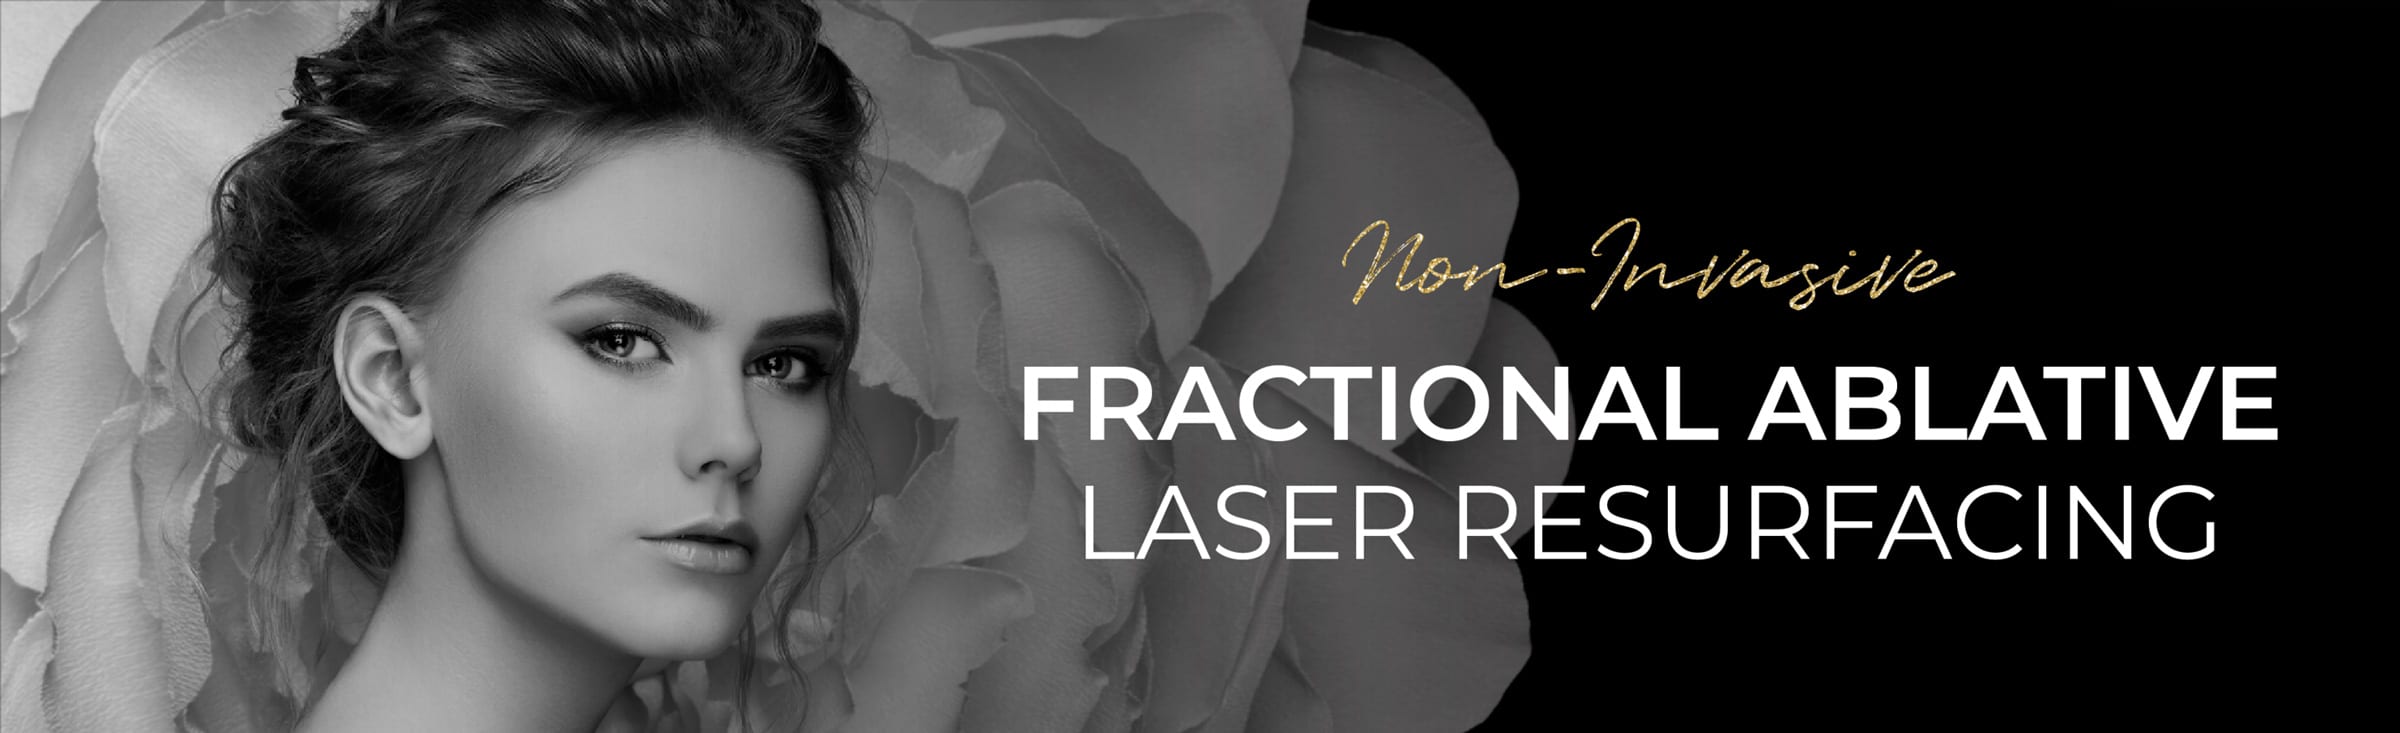 non-surgical-fractional-ablative-laser